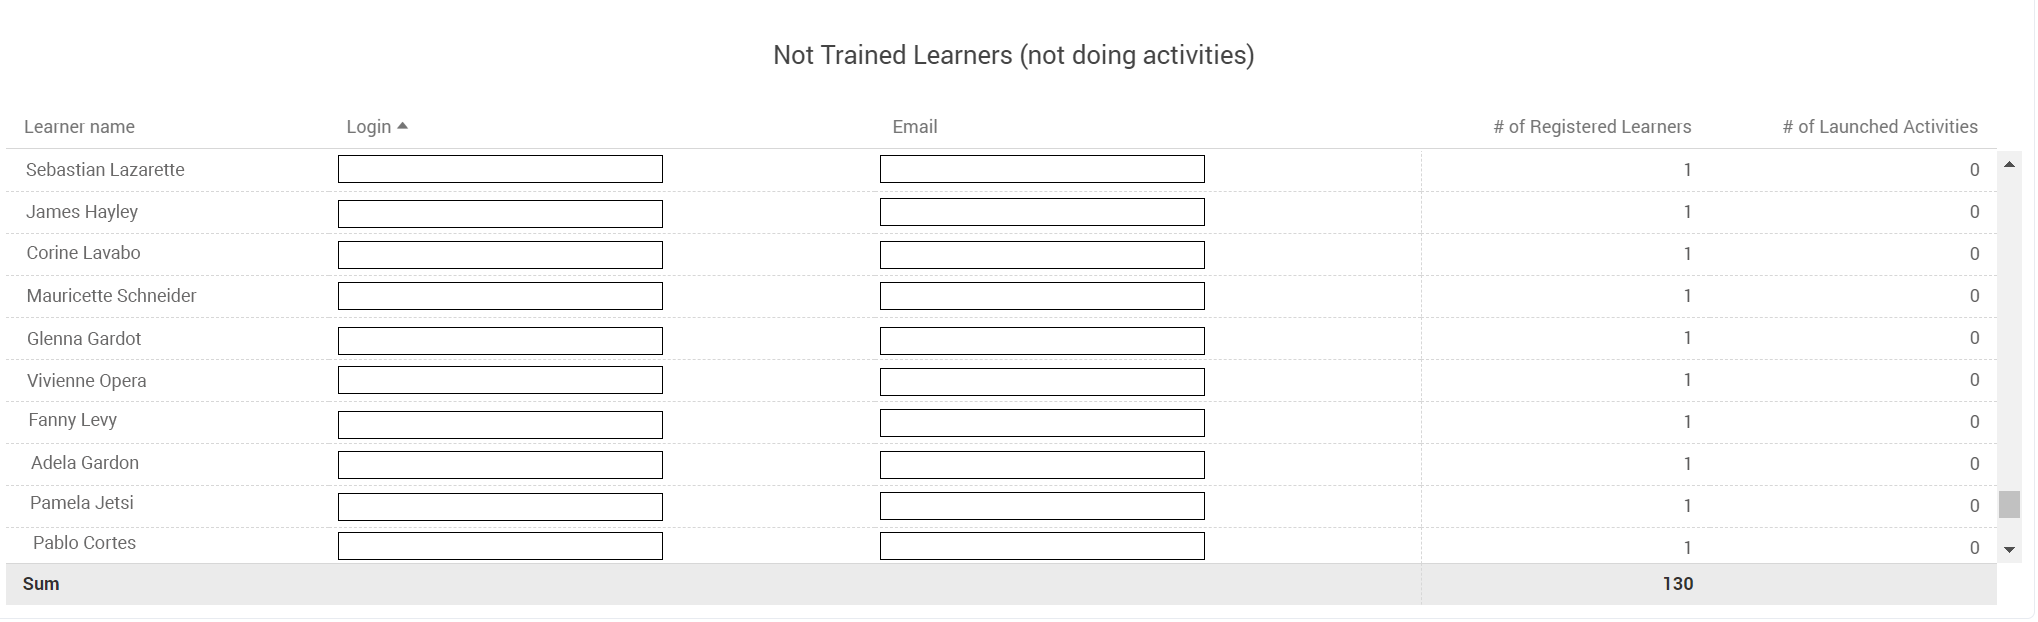 Learners details - not trained learners (not doing activities).png